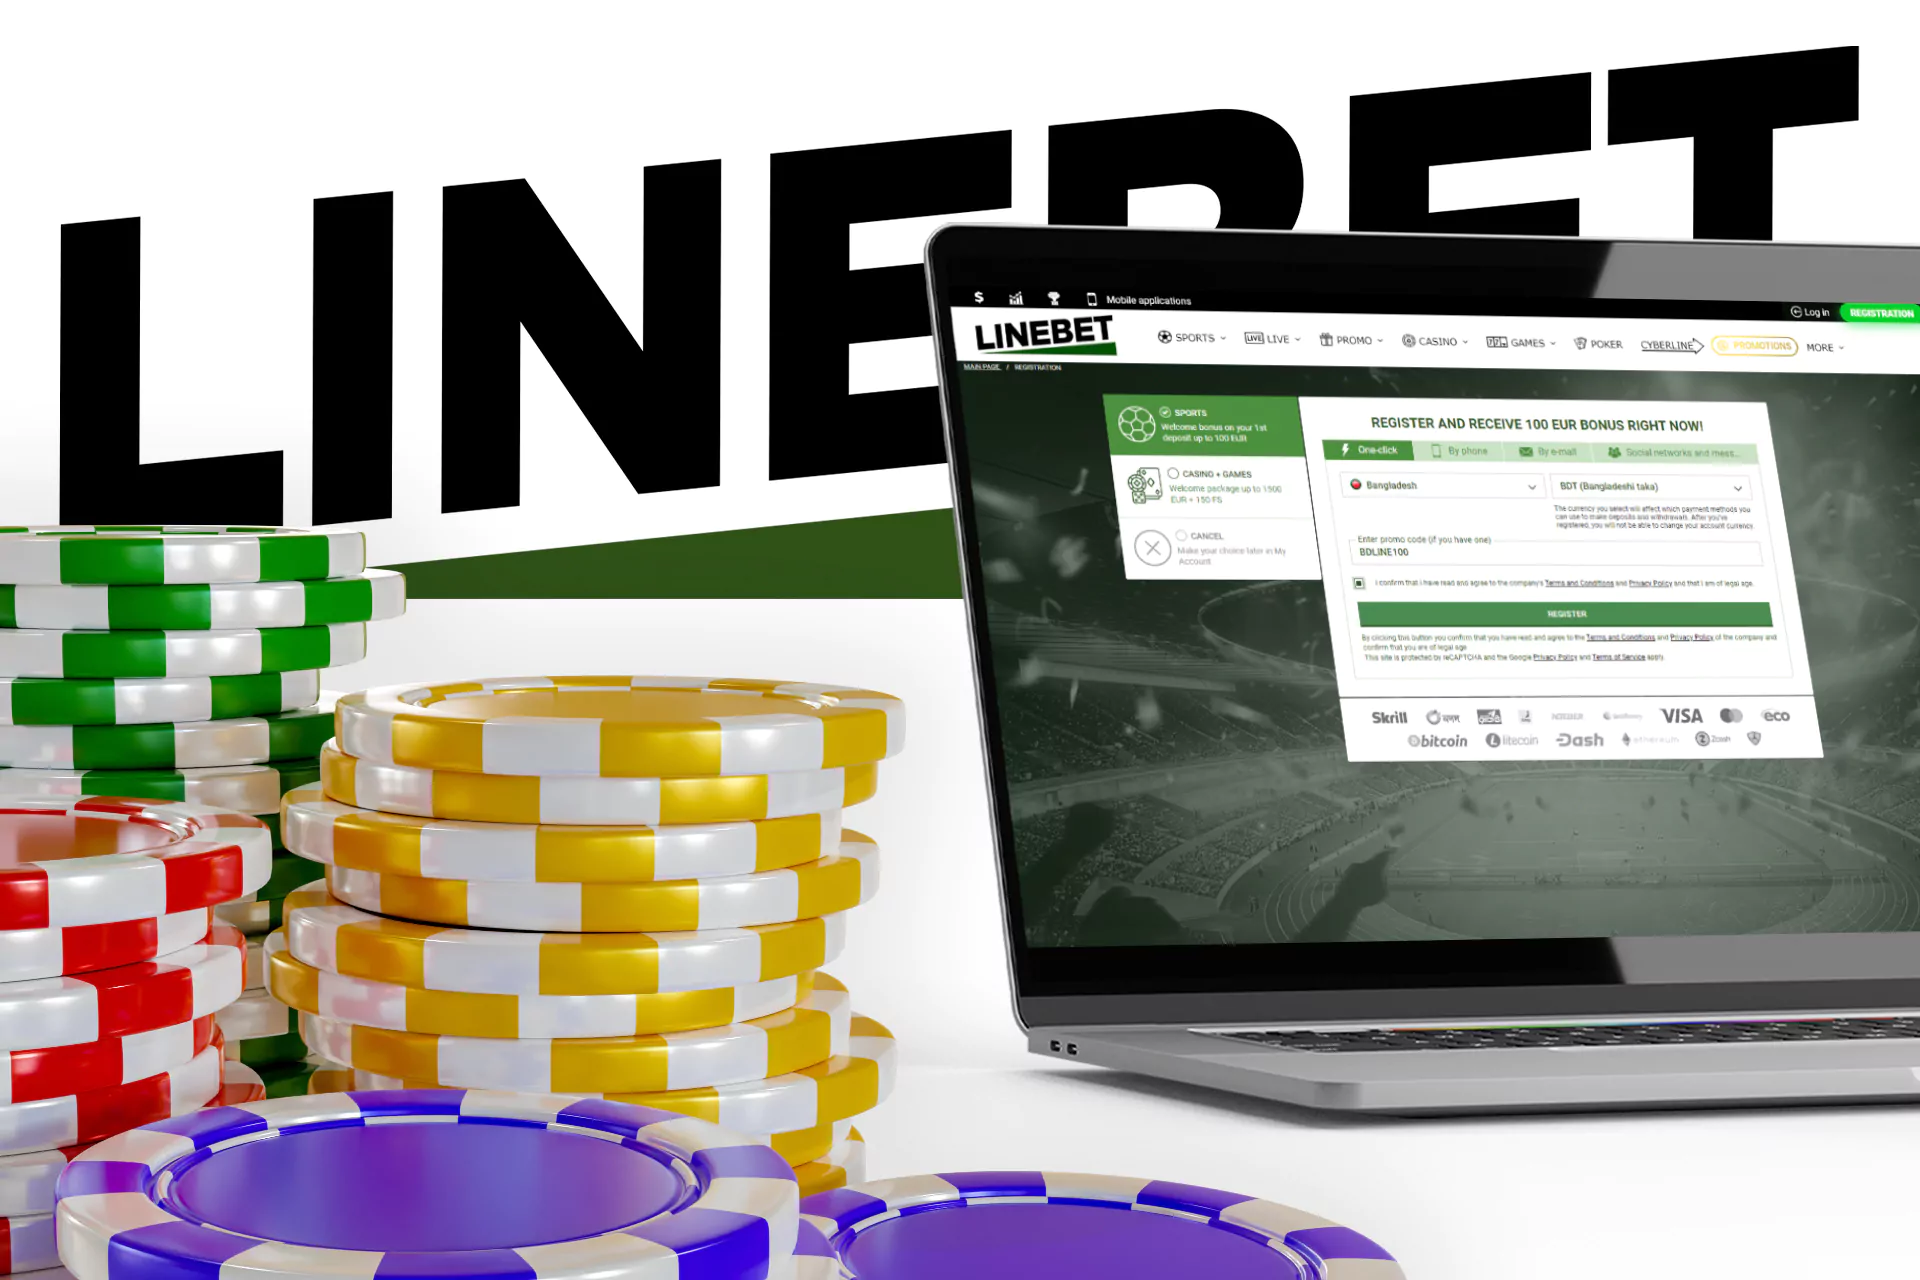 To play casino games, log in to your account or sign up.